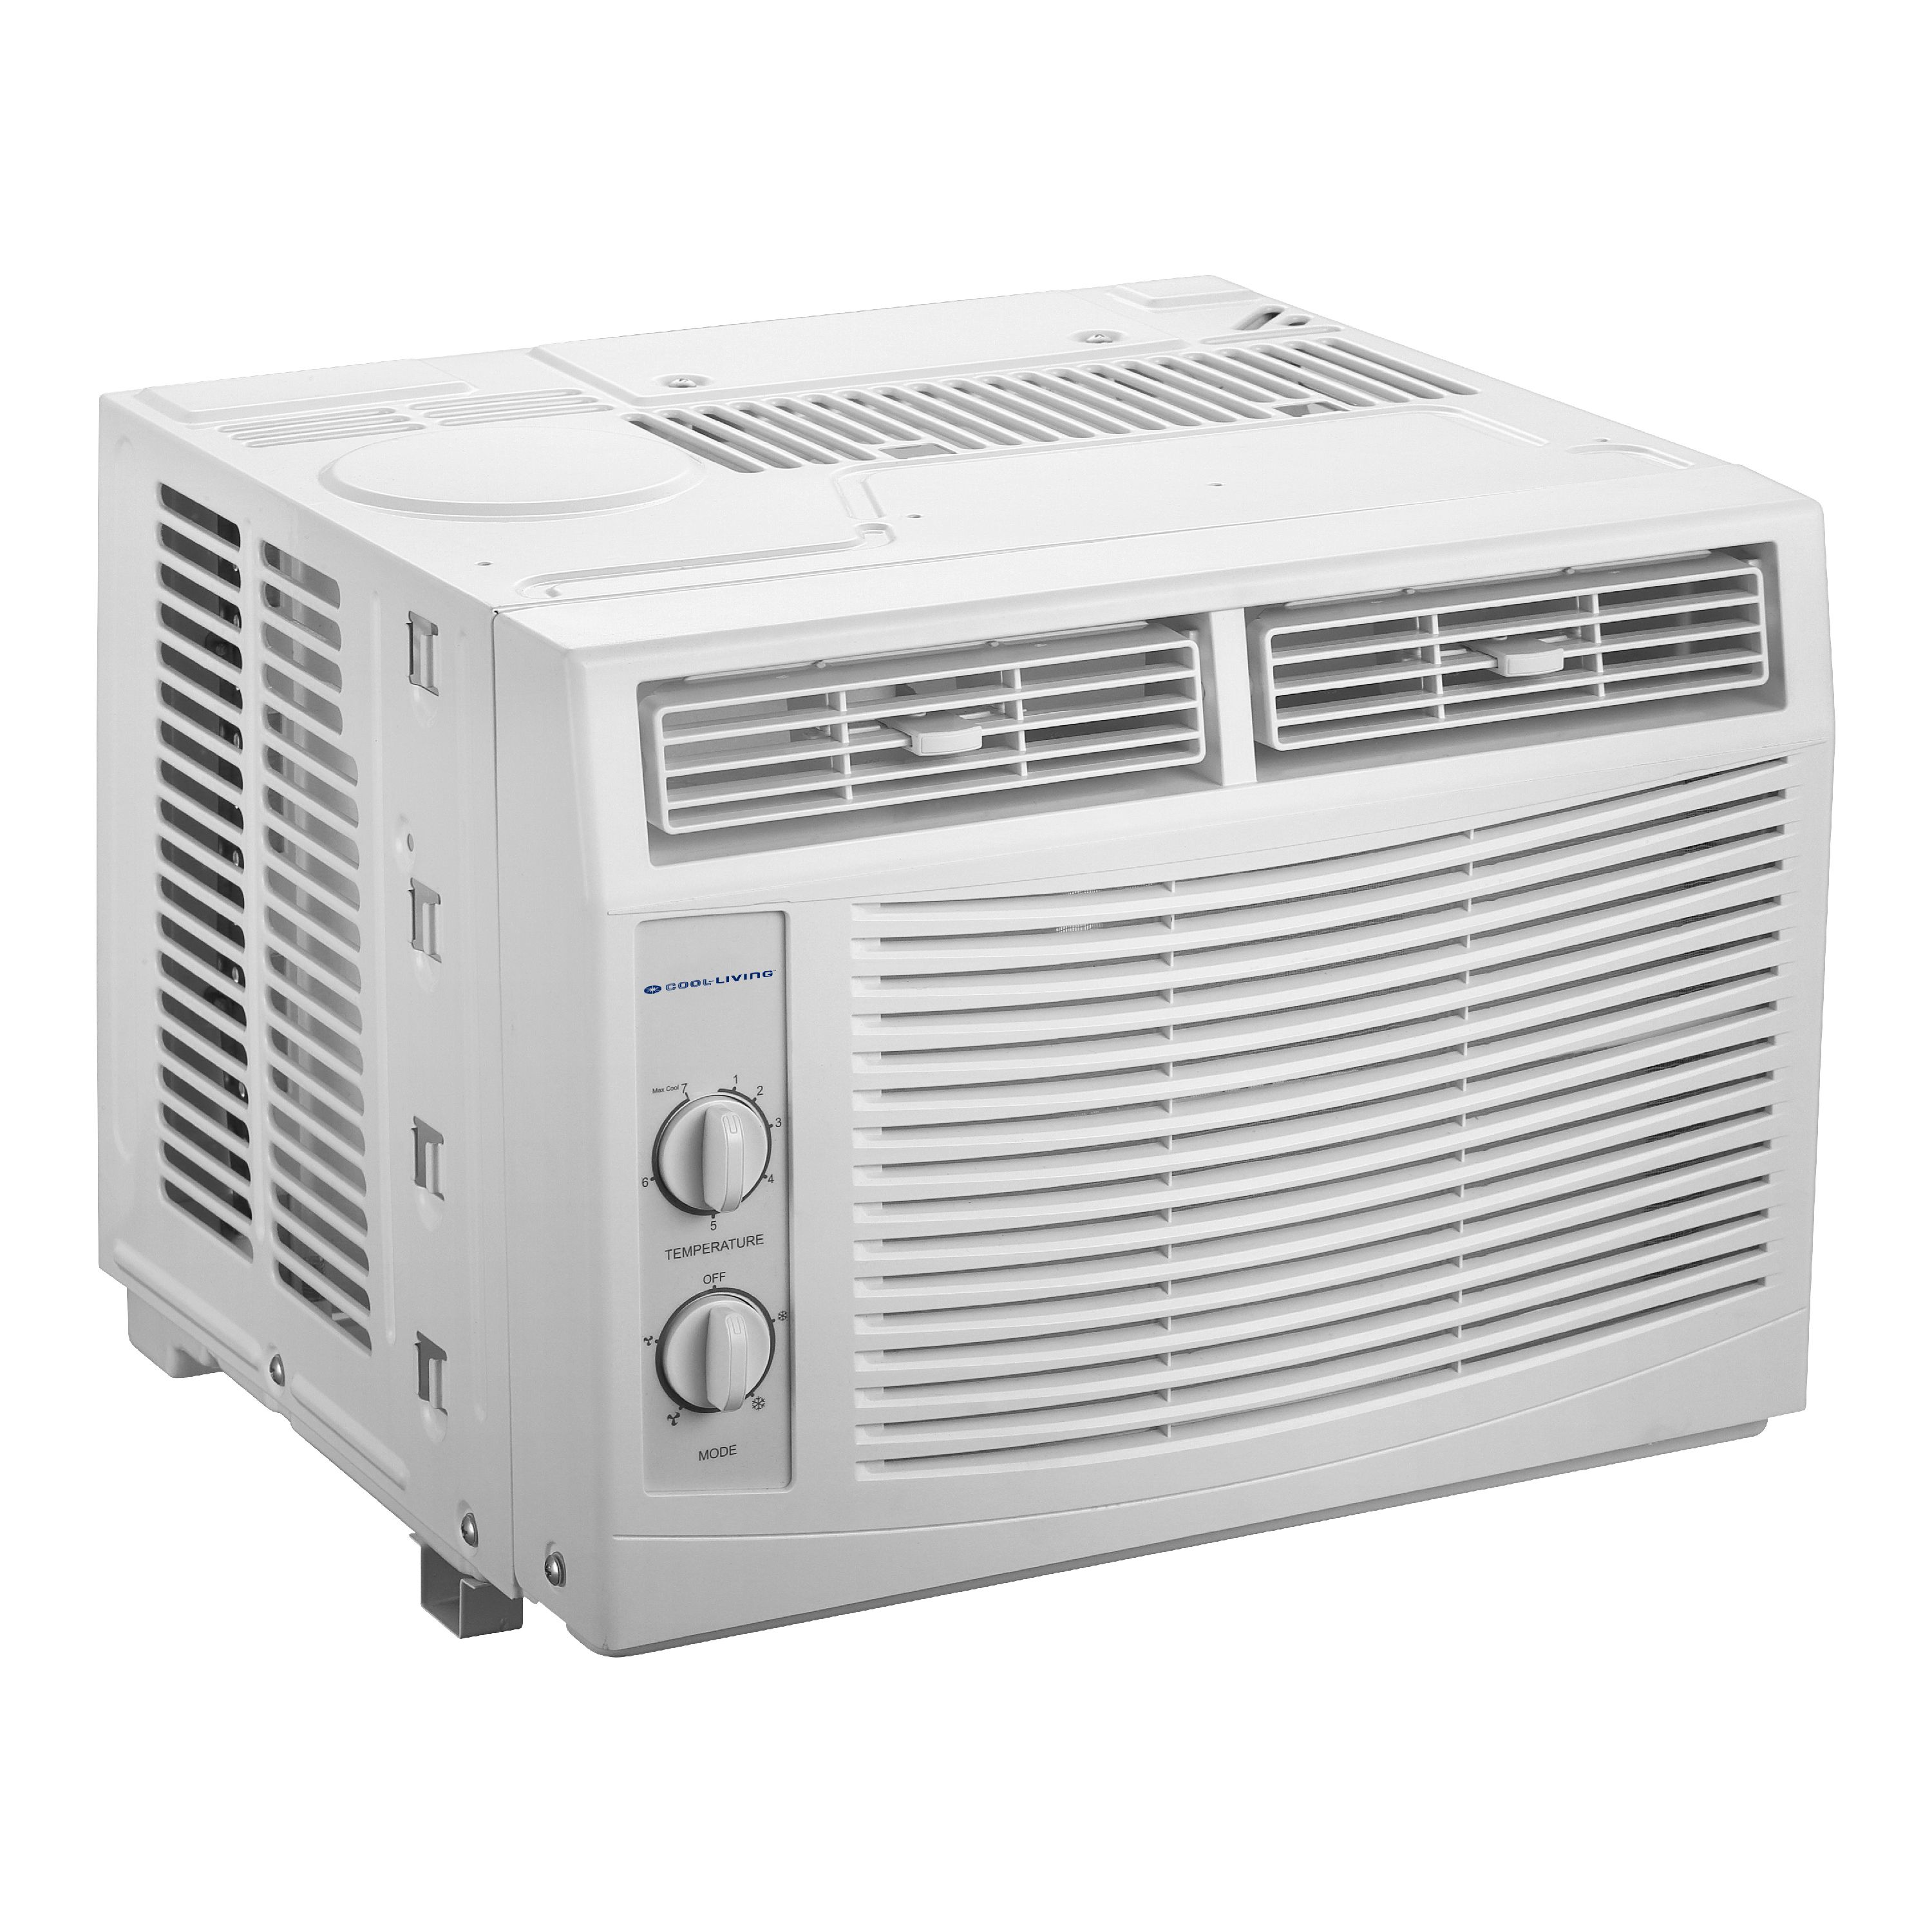 Cool-Living 5,000 BTU Window Air Conditioner with Installation Kit - image 3 of 5